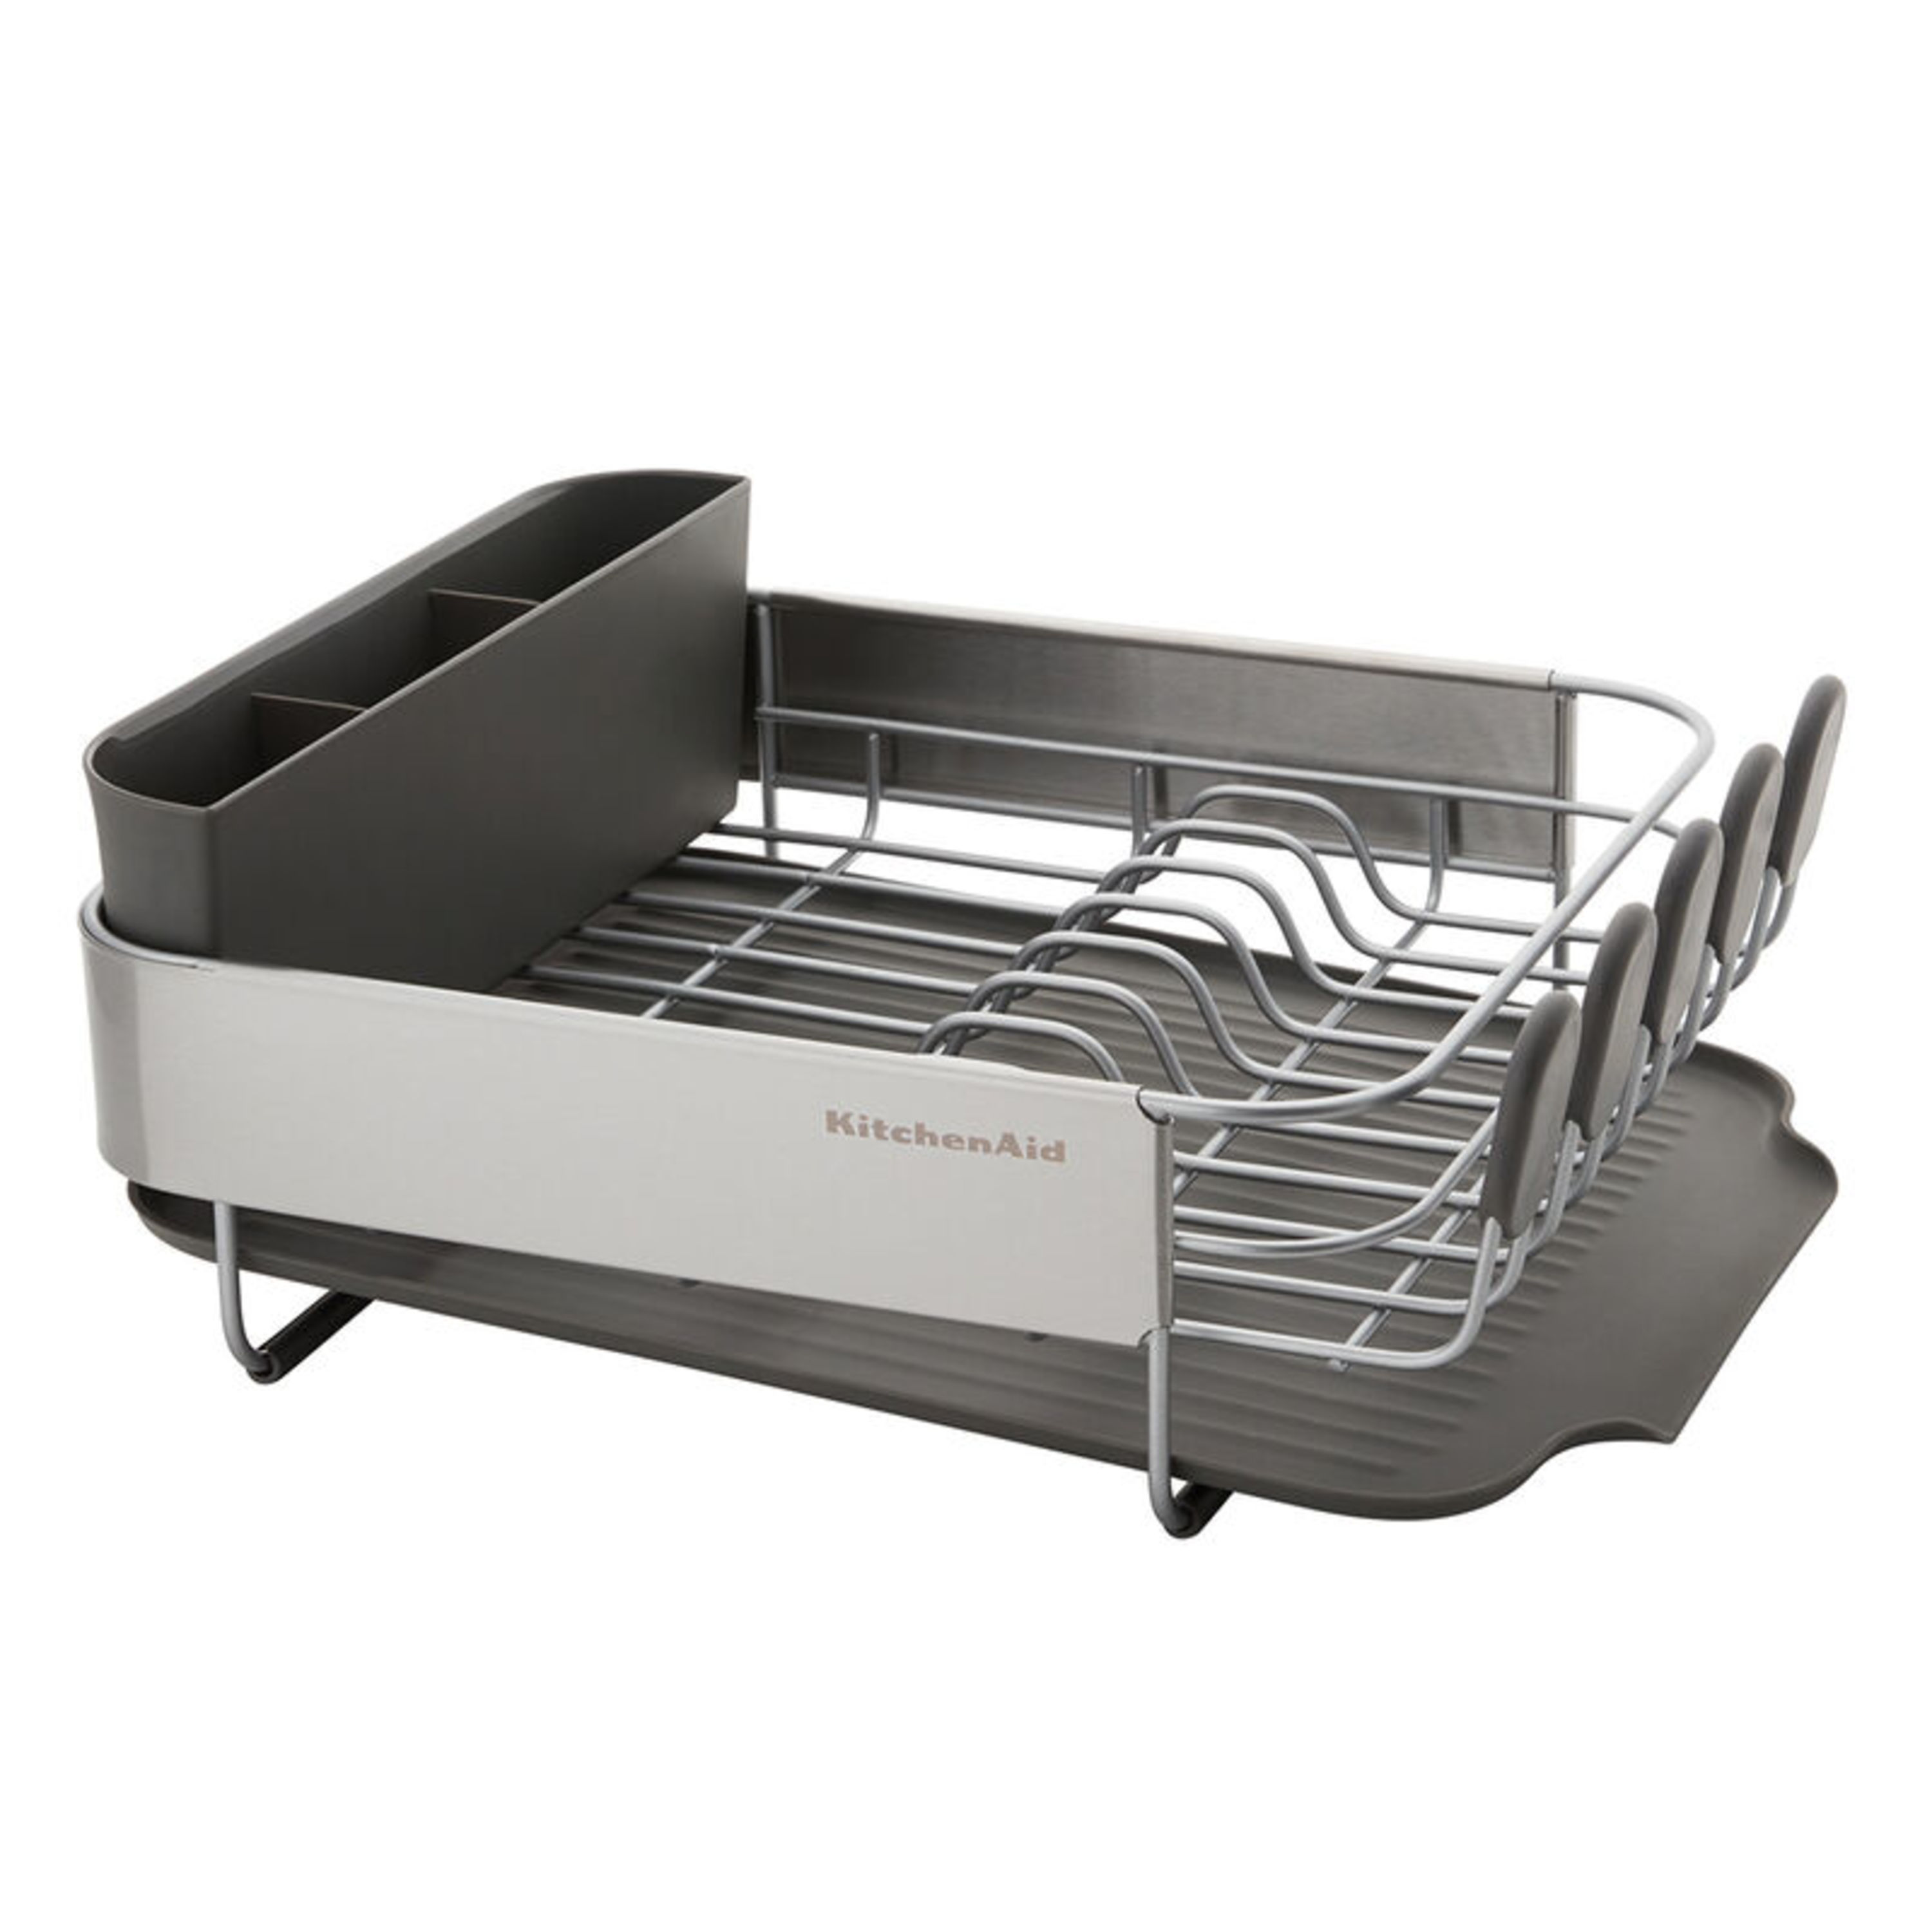 Kitchenaid Stainless Steel Wrap Compact Dish Rack in Satin Gray - image 1 of 9